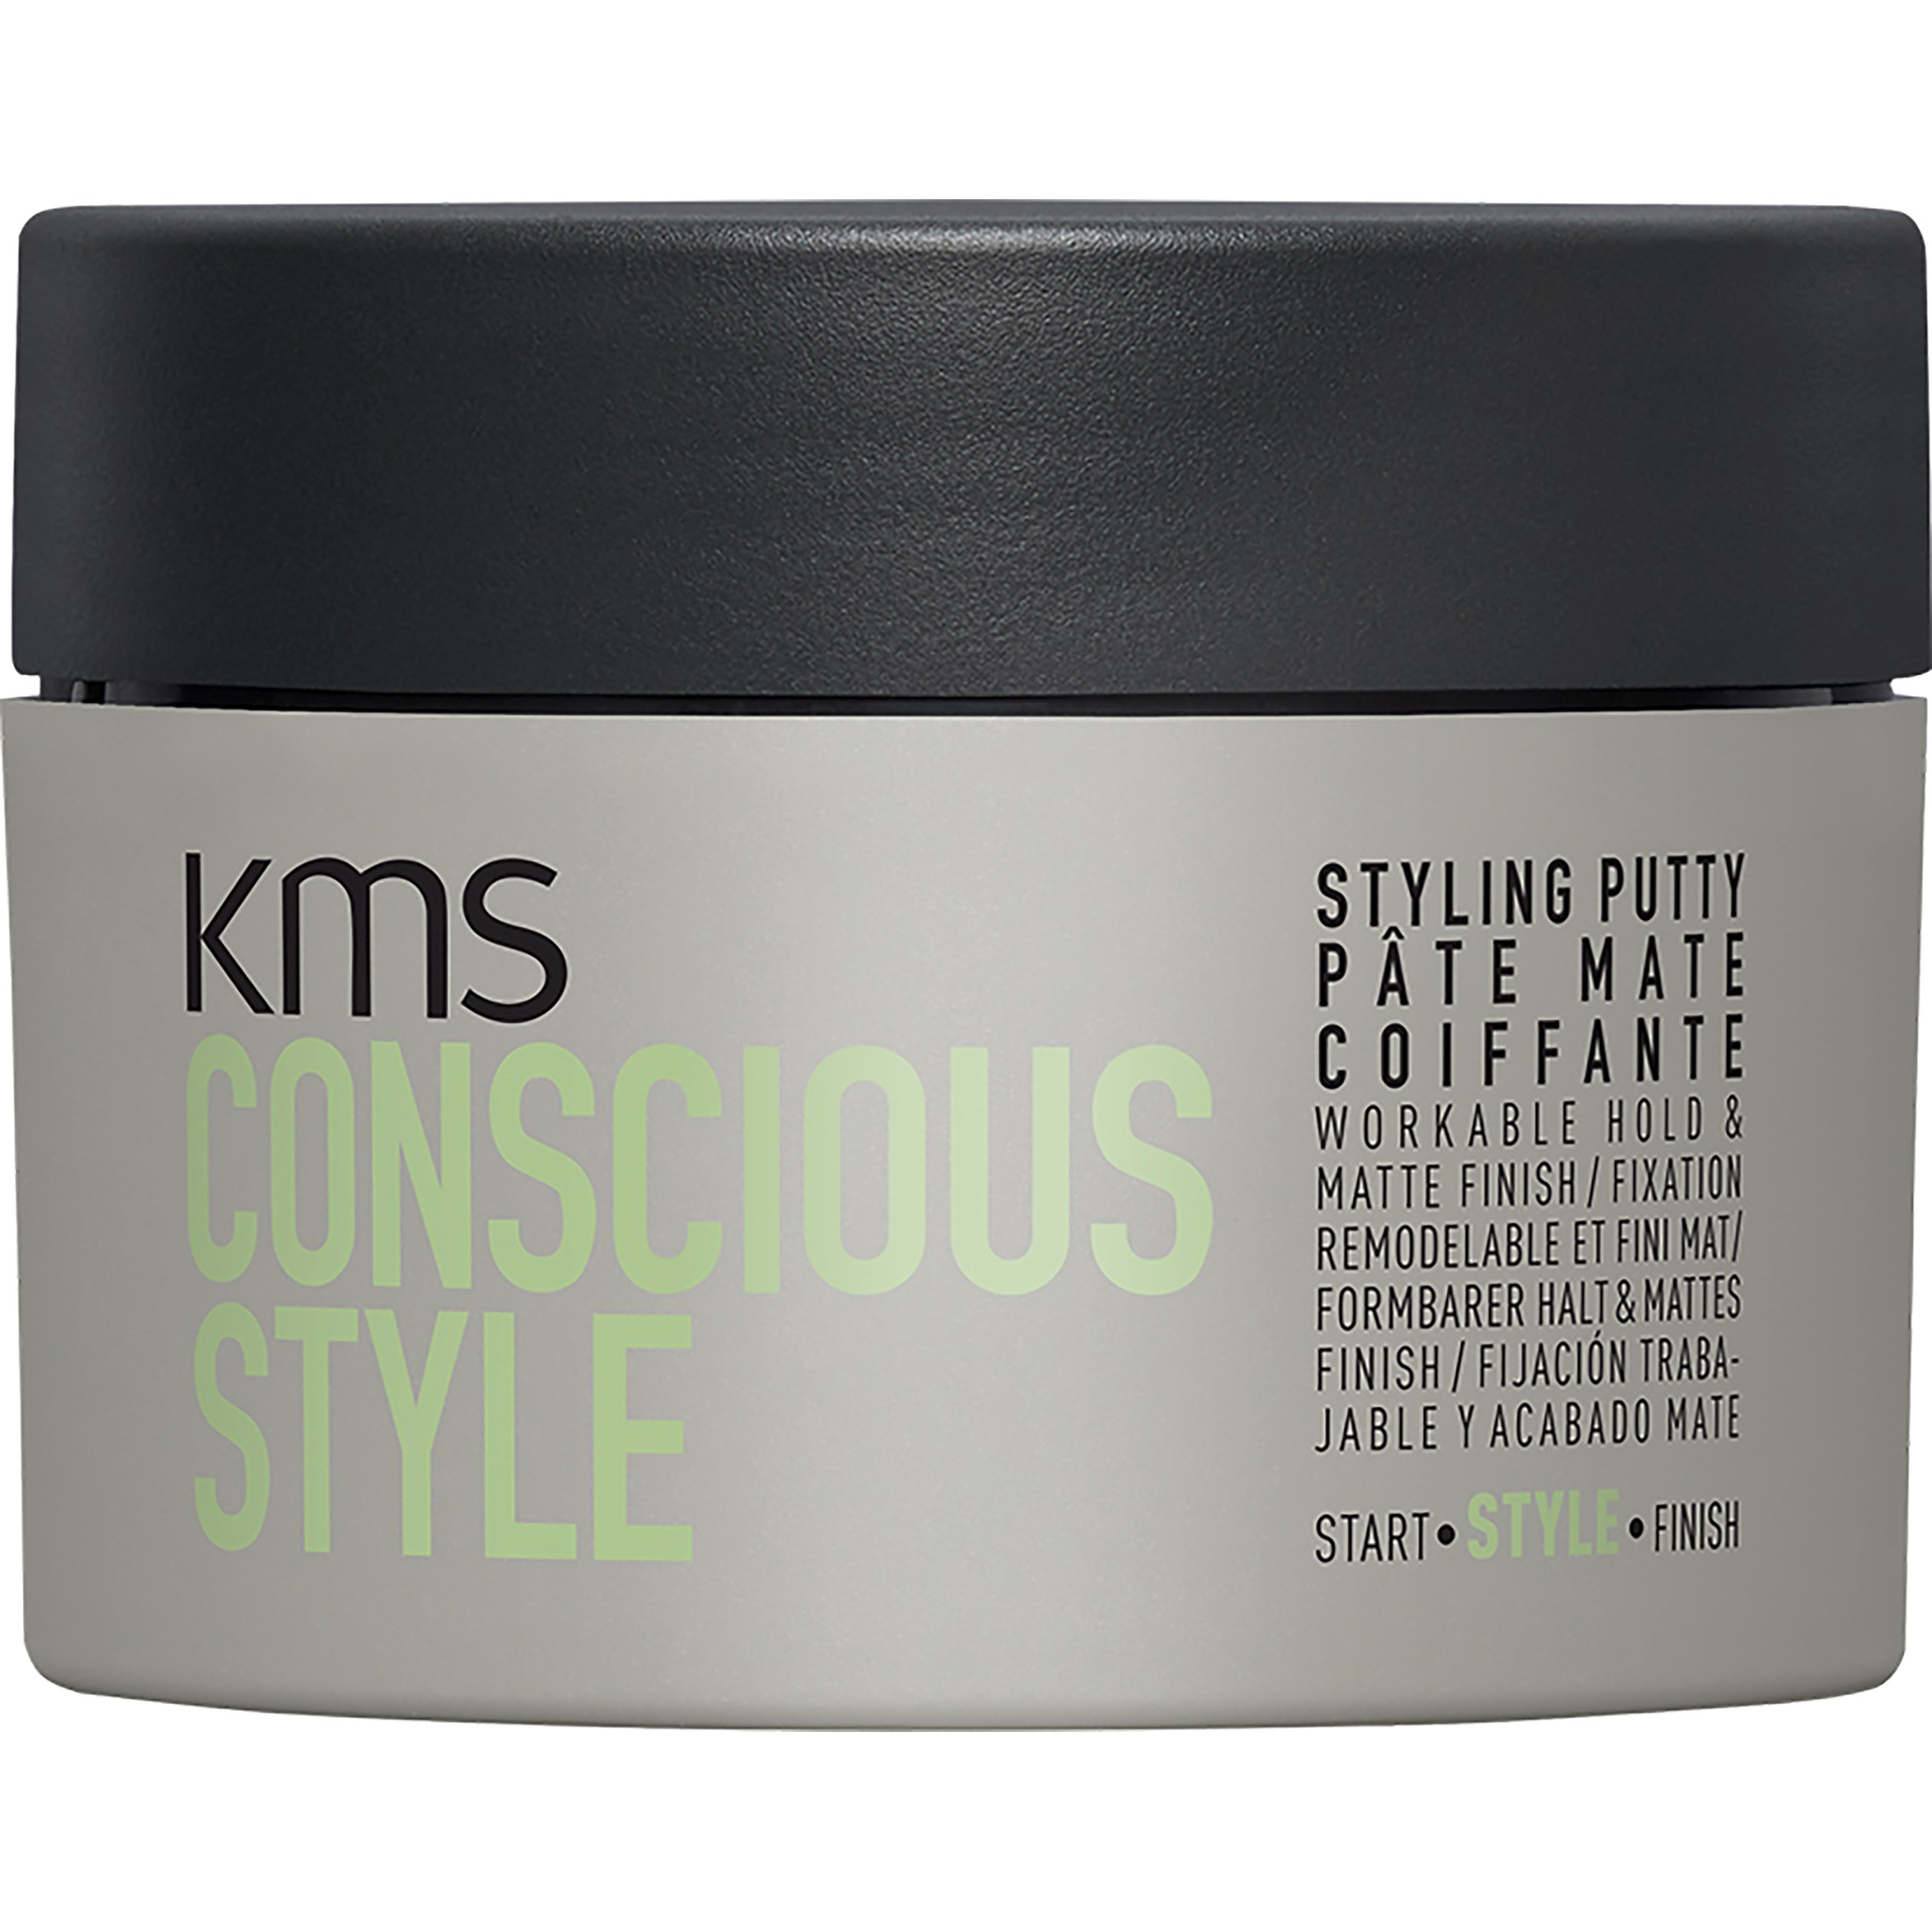 Läs mer om KMS Conscious Style STYLE Styling Putty 75 ml